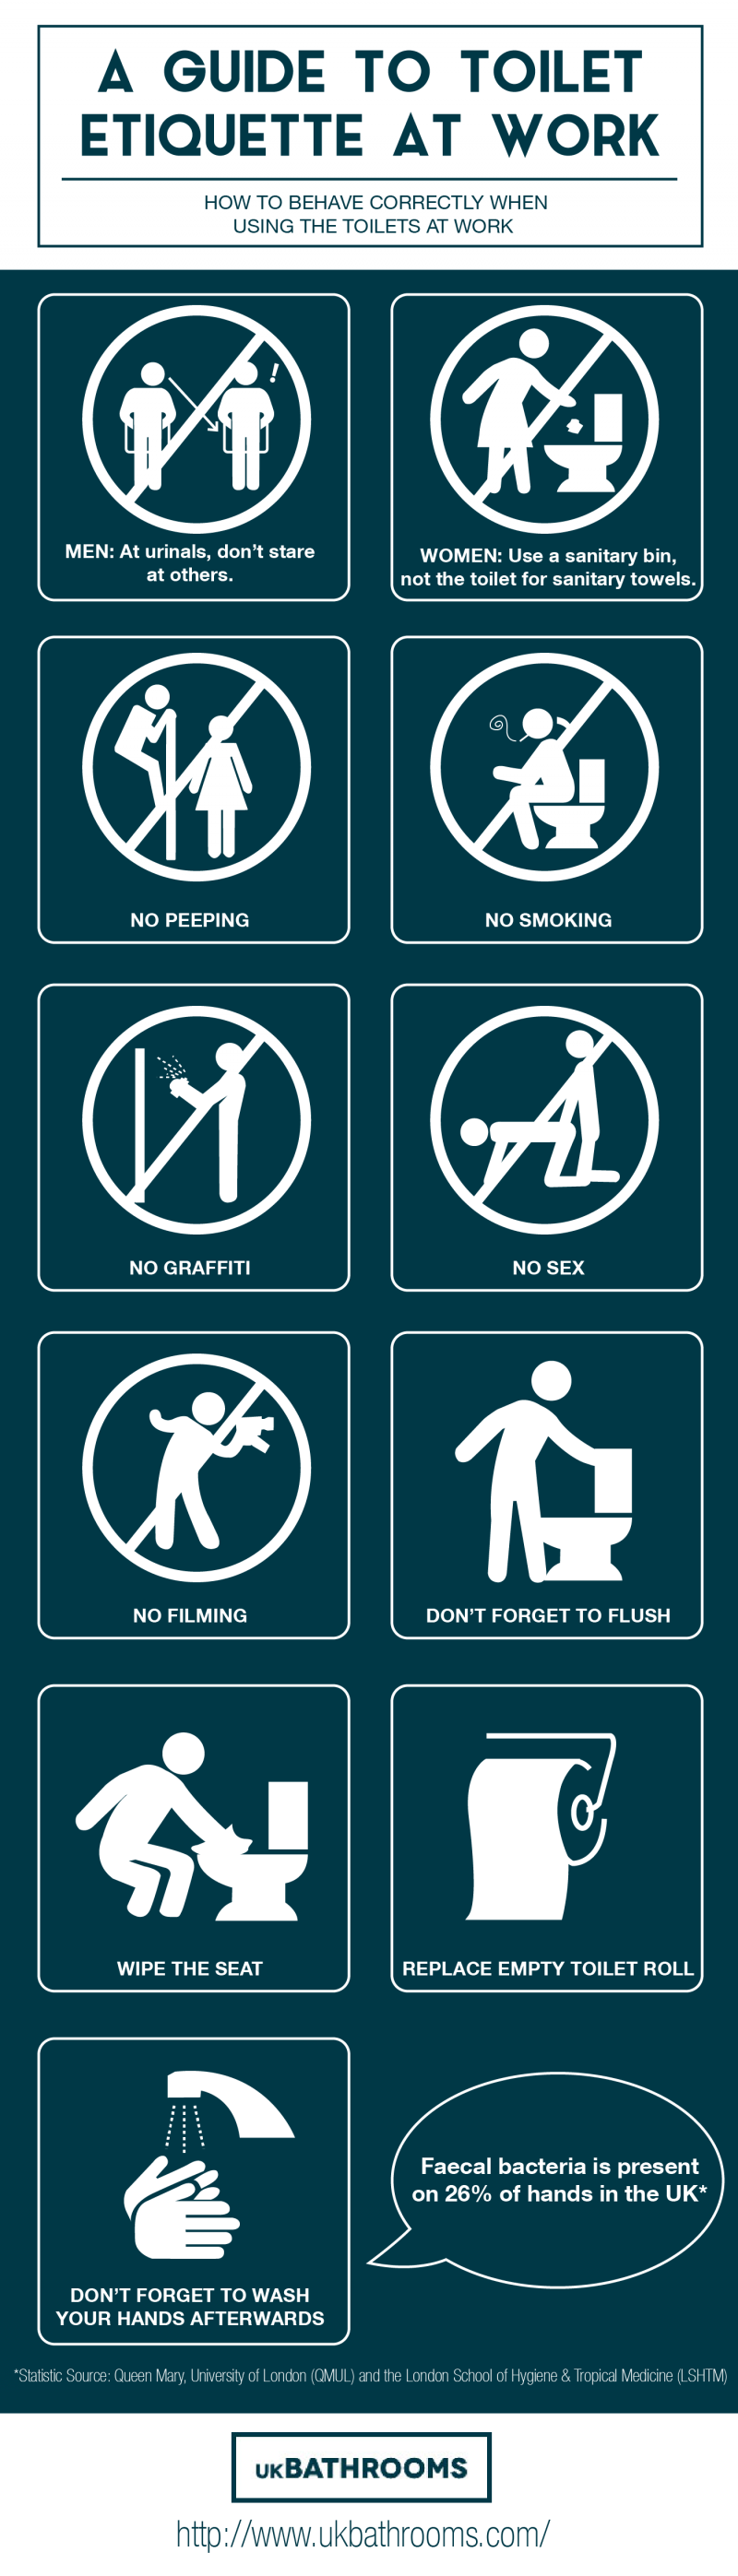 A Guide to Toilet Etiquette at Work